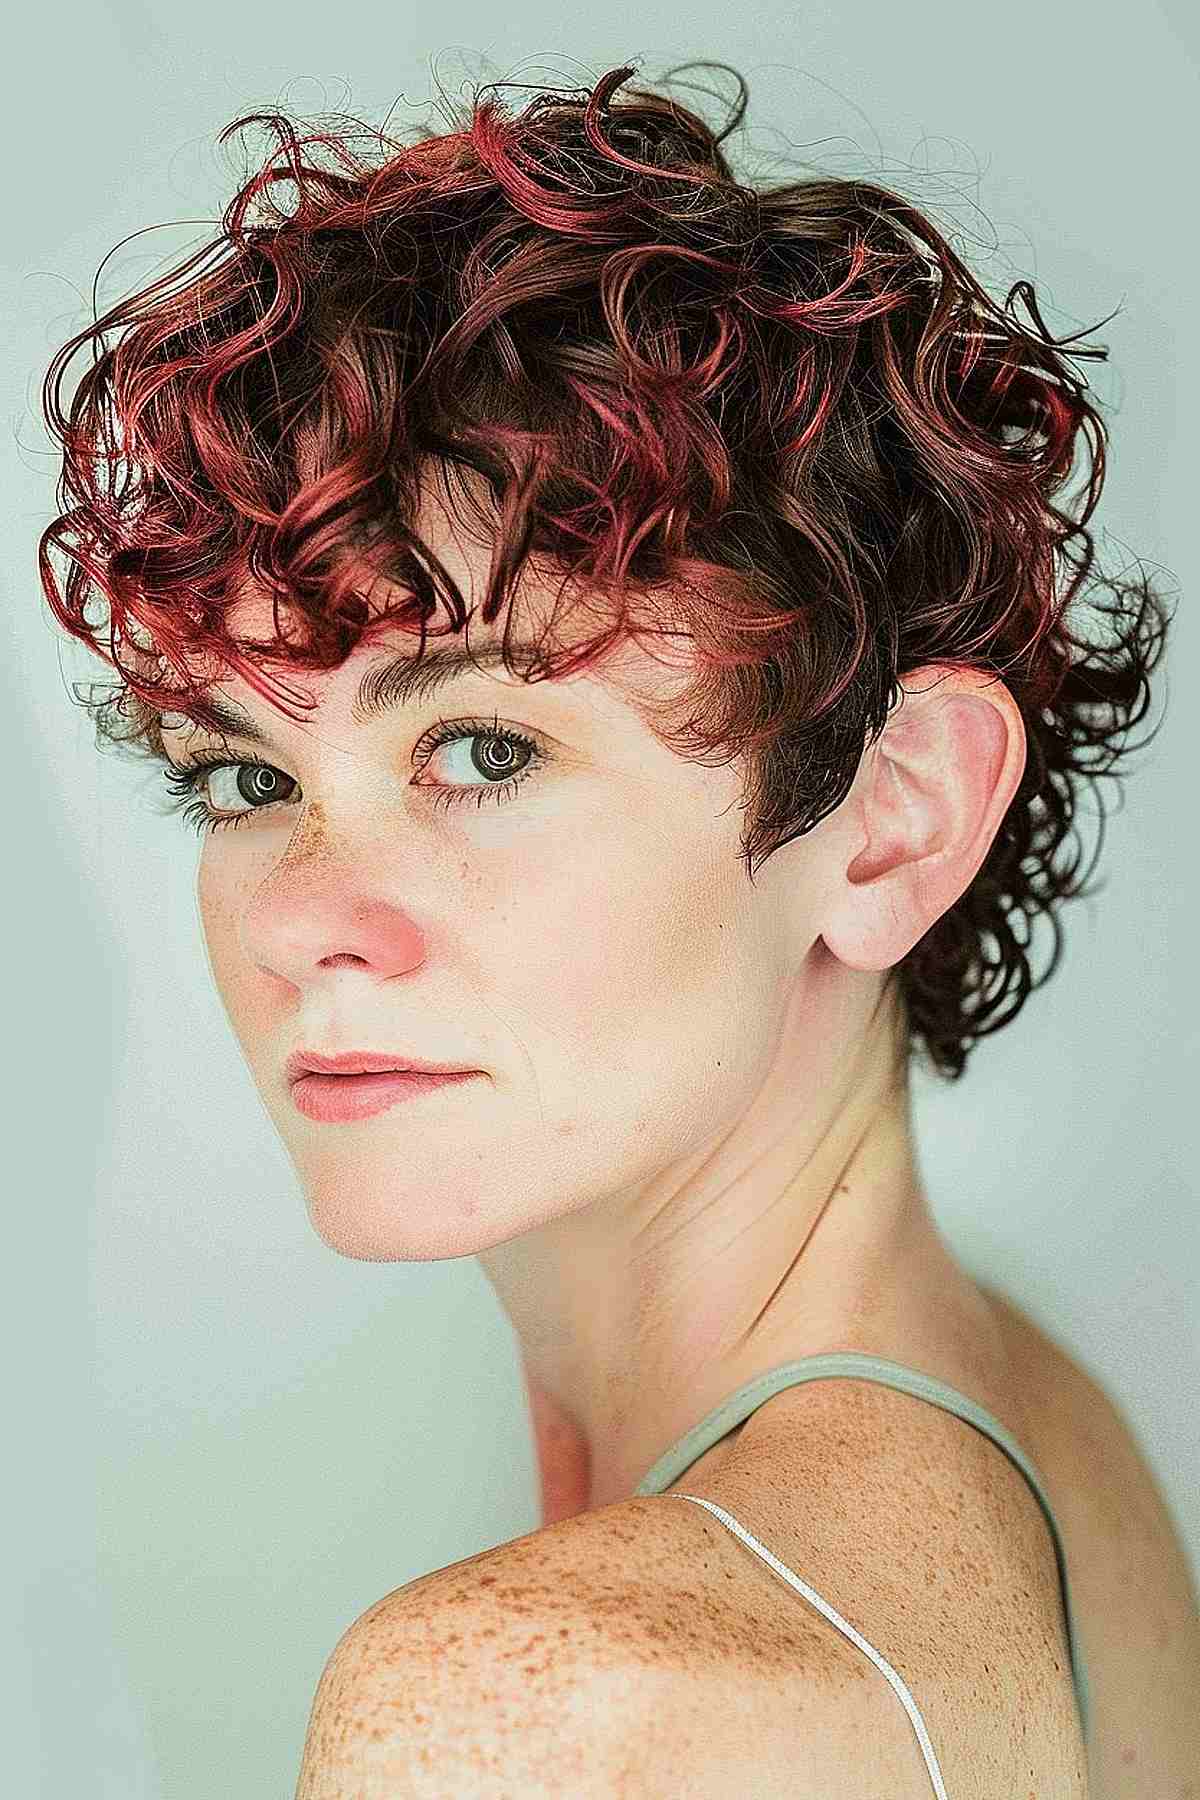 Short curly elf crop with red highlights, ideal for naturally curly hair.